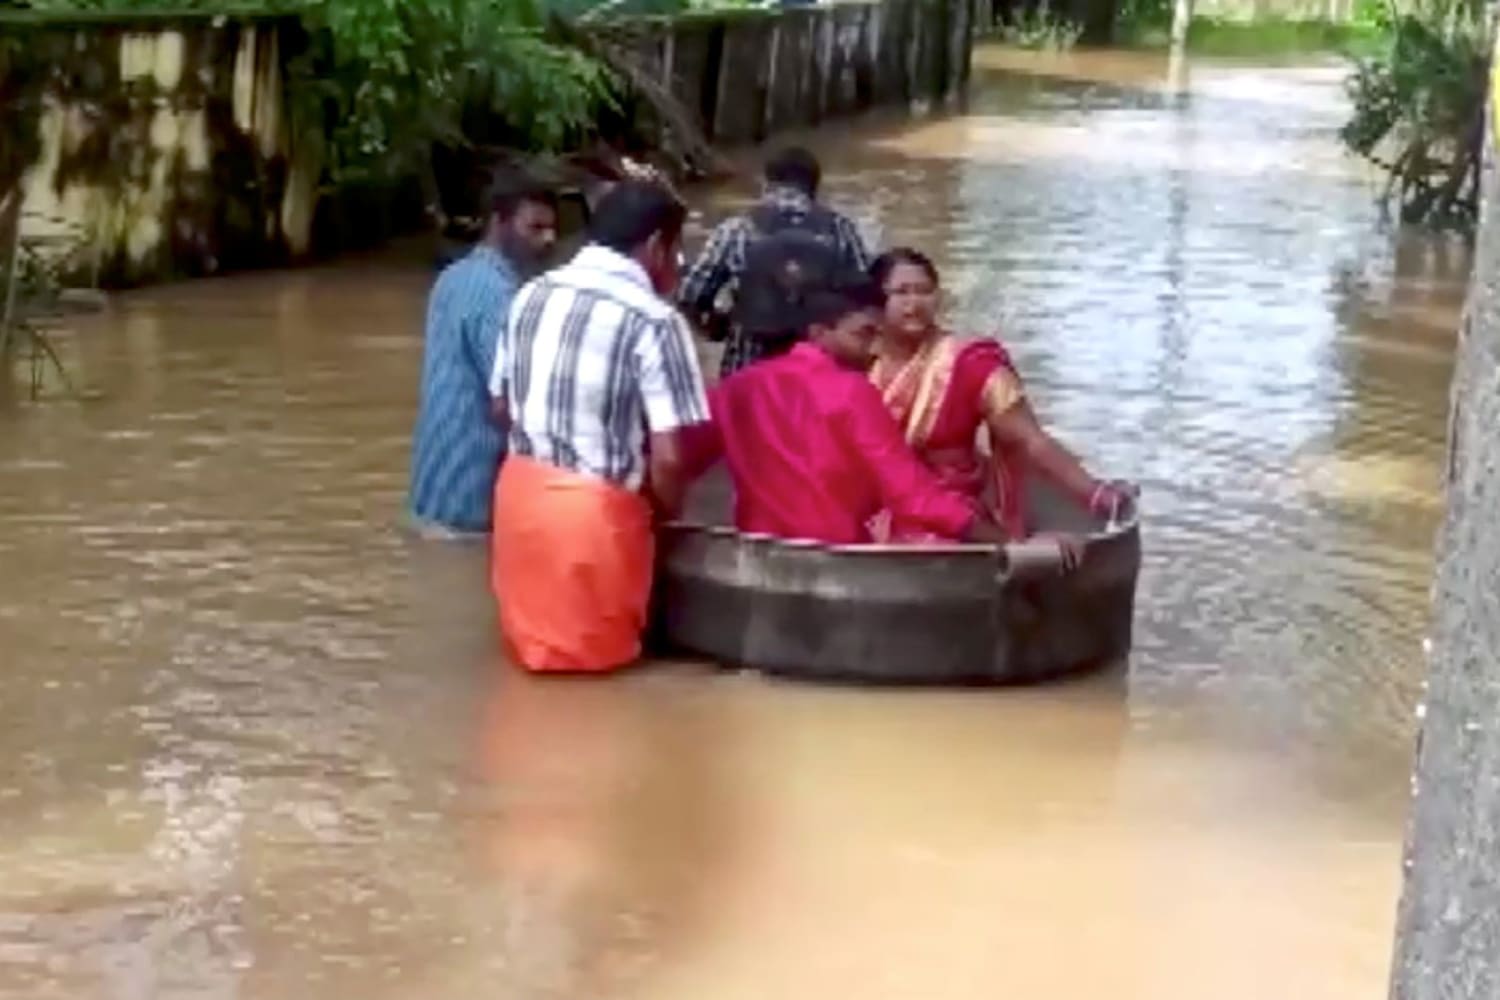 No boat, no problem: Indian bride and groom sail to flood-hit wedding in cooking pot